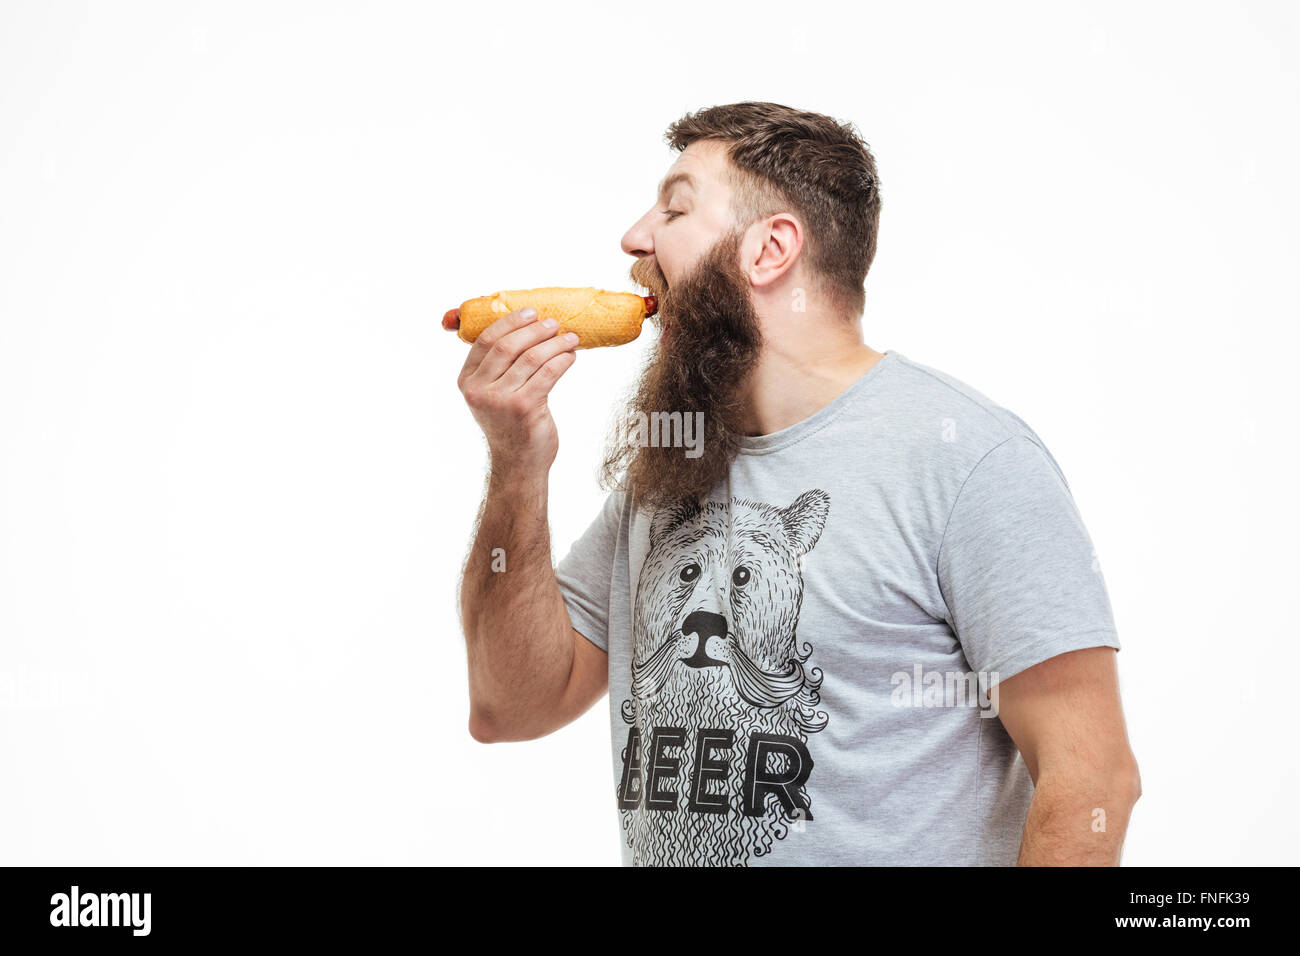 Profile of handsome man with beard standing and eating hot dog over white background Stock Photo